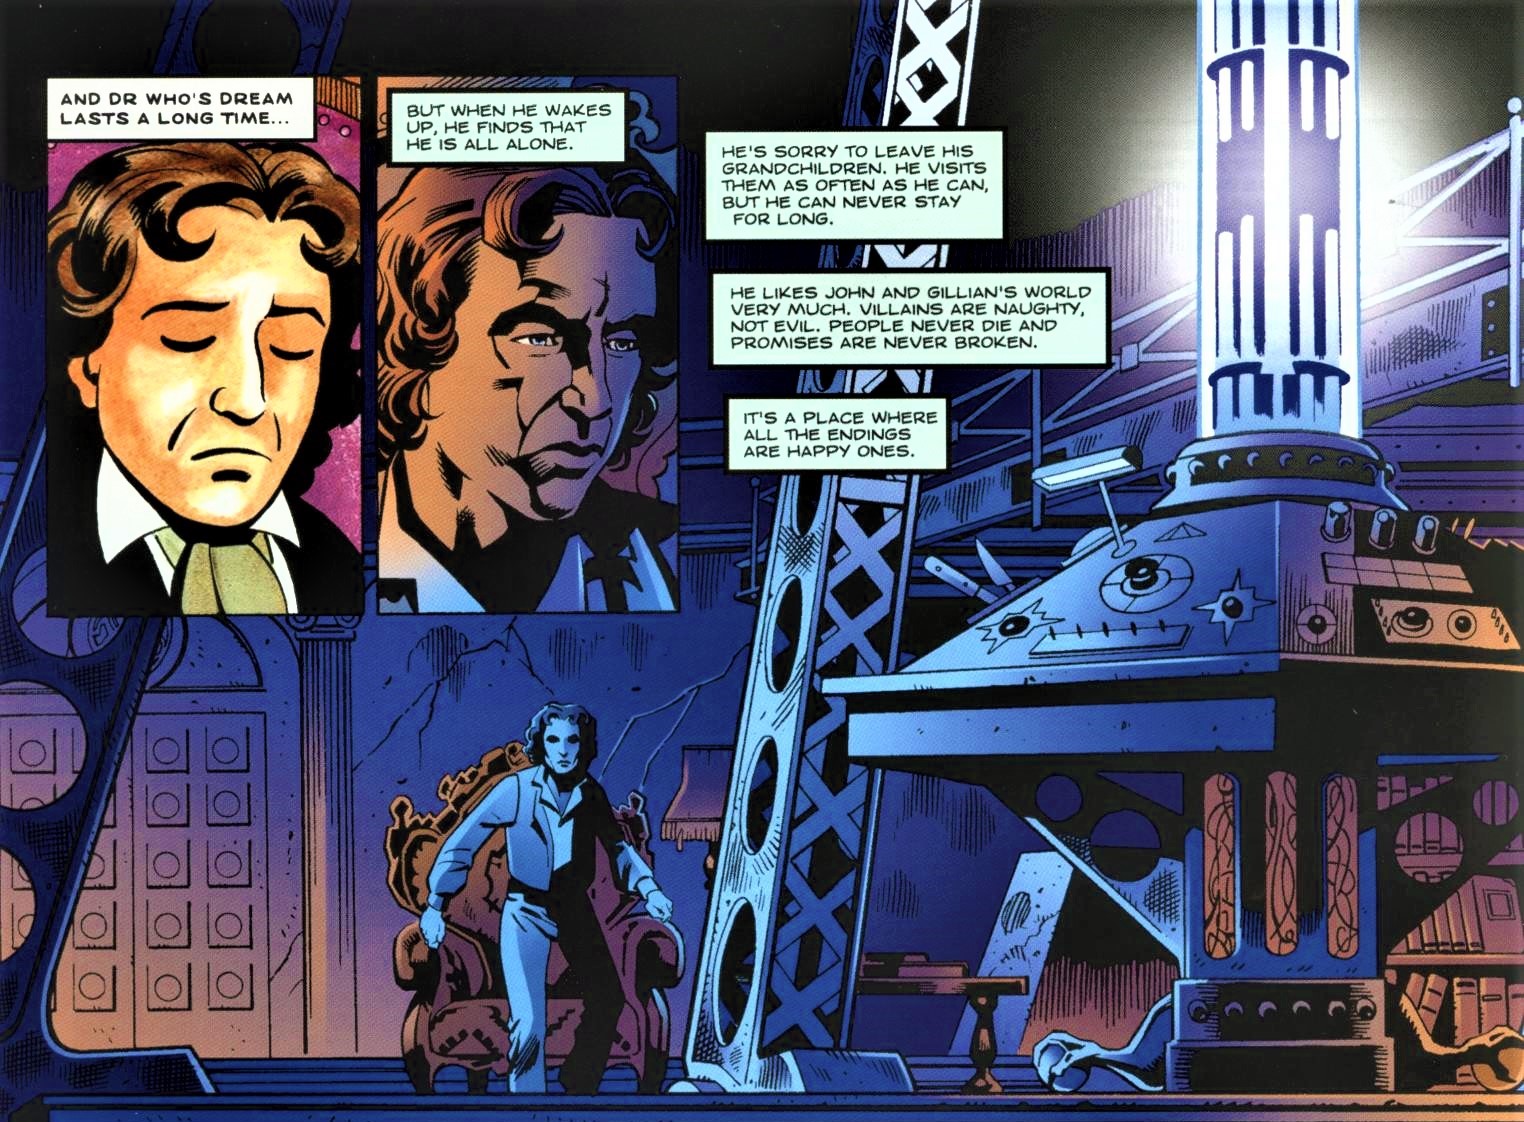 The Doctor wakes up in the real TARDIS. (COMIC: The Land of Happy Endings [+]Loading...["The Land of Happy Endings (comic story)"])